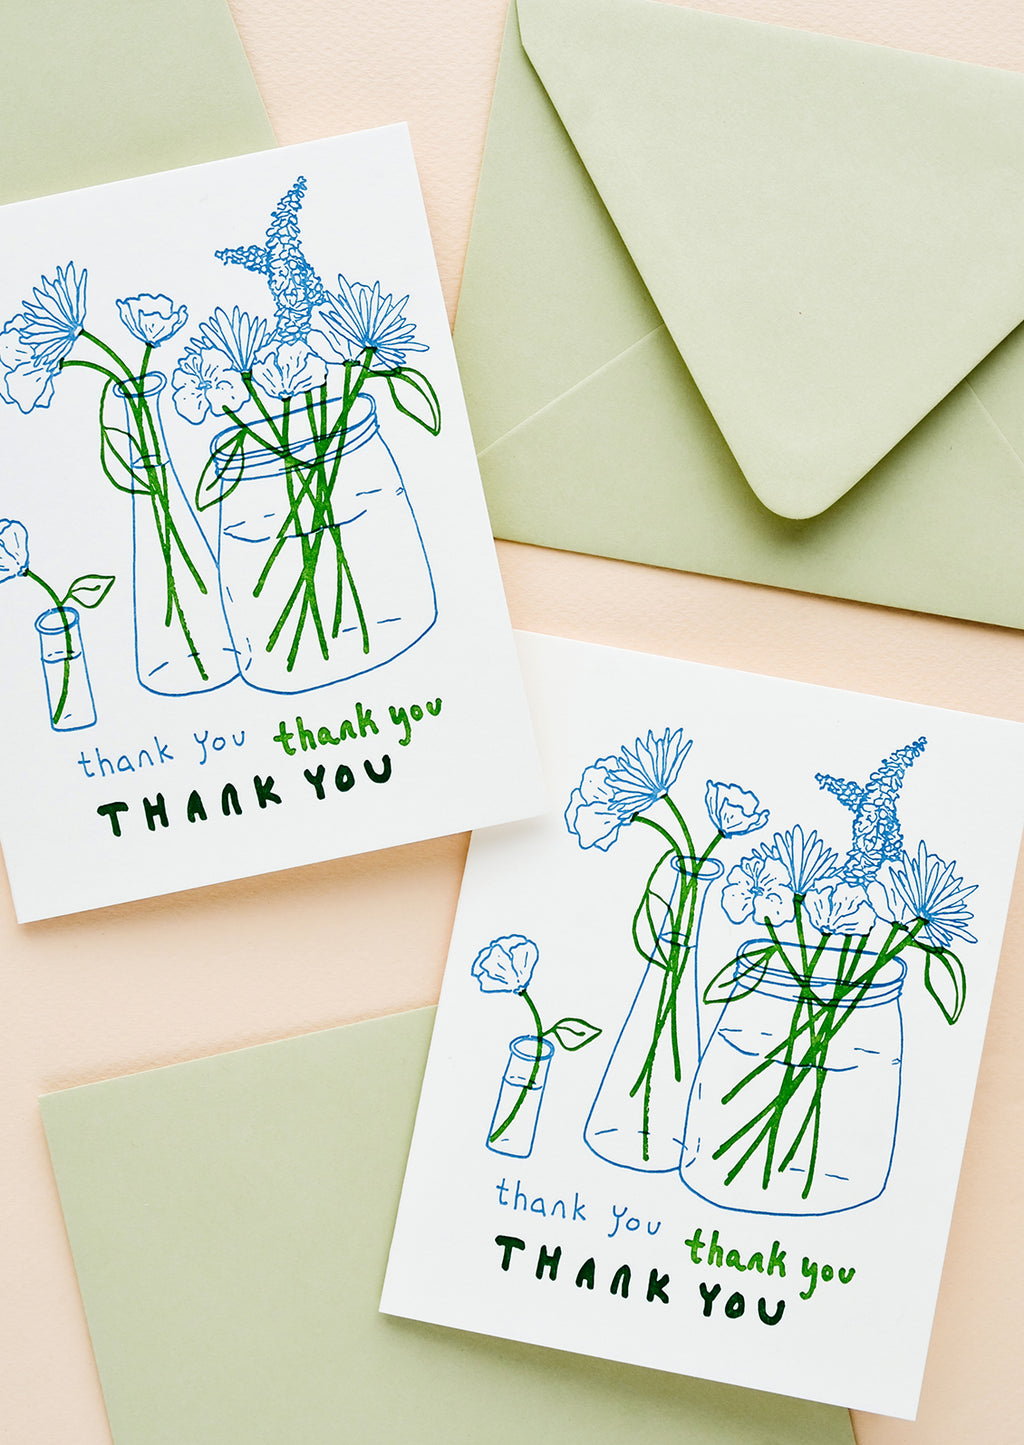 1: Two matching greeting cards with image of flowers in vases and "thank you" written three times, plus green envelopes.